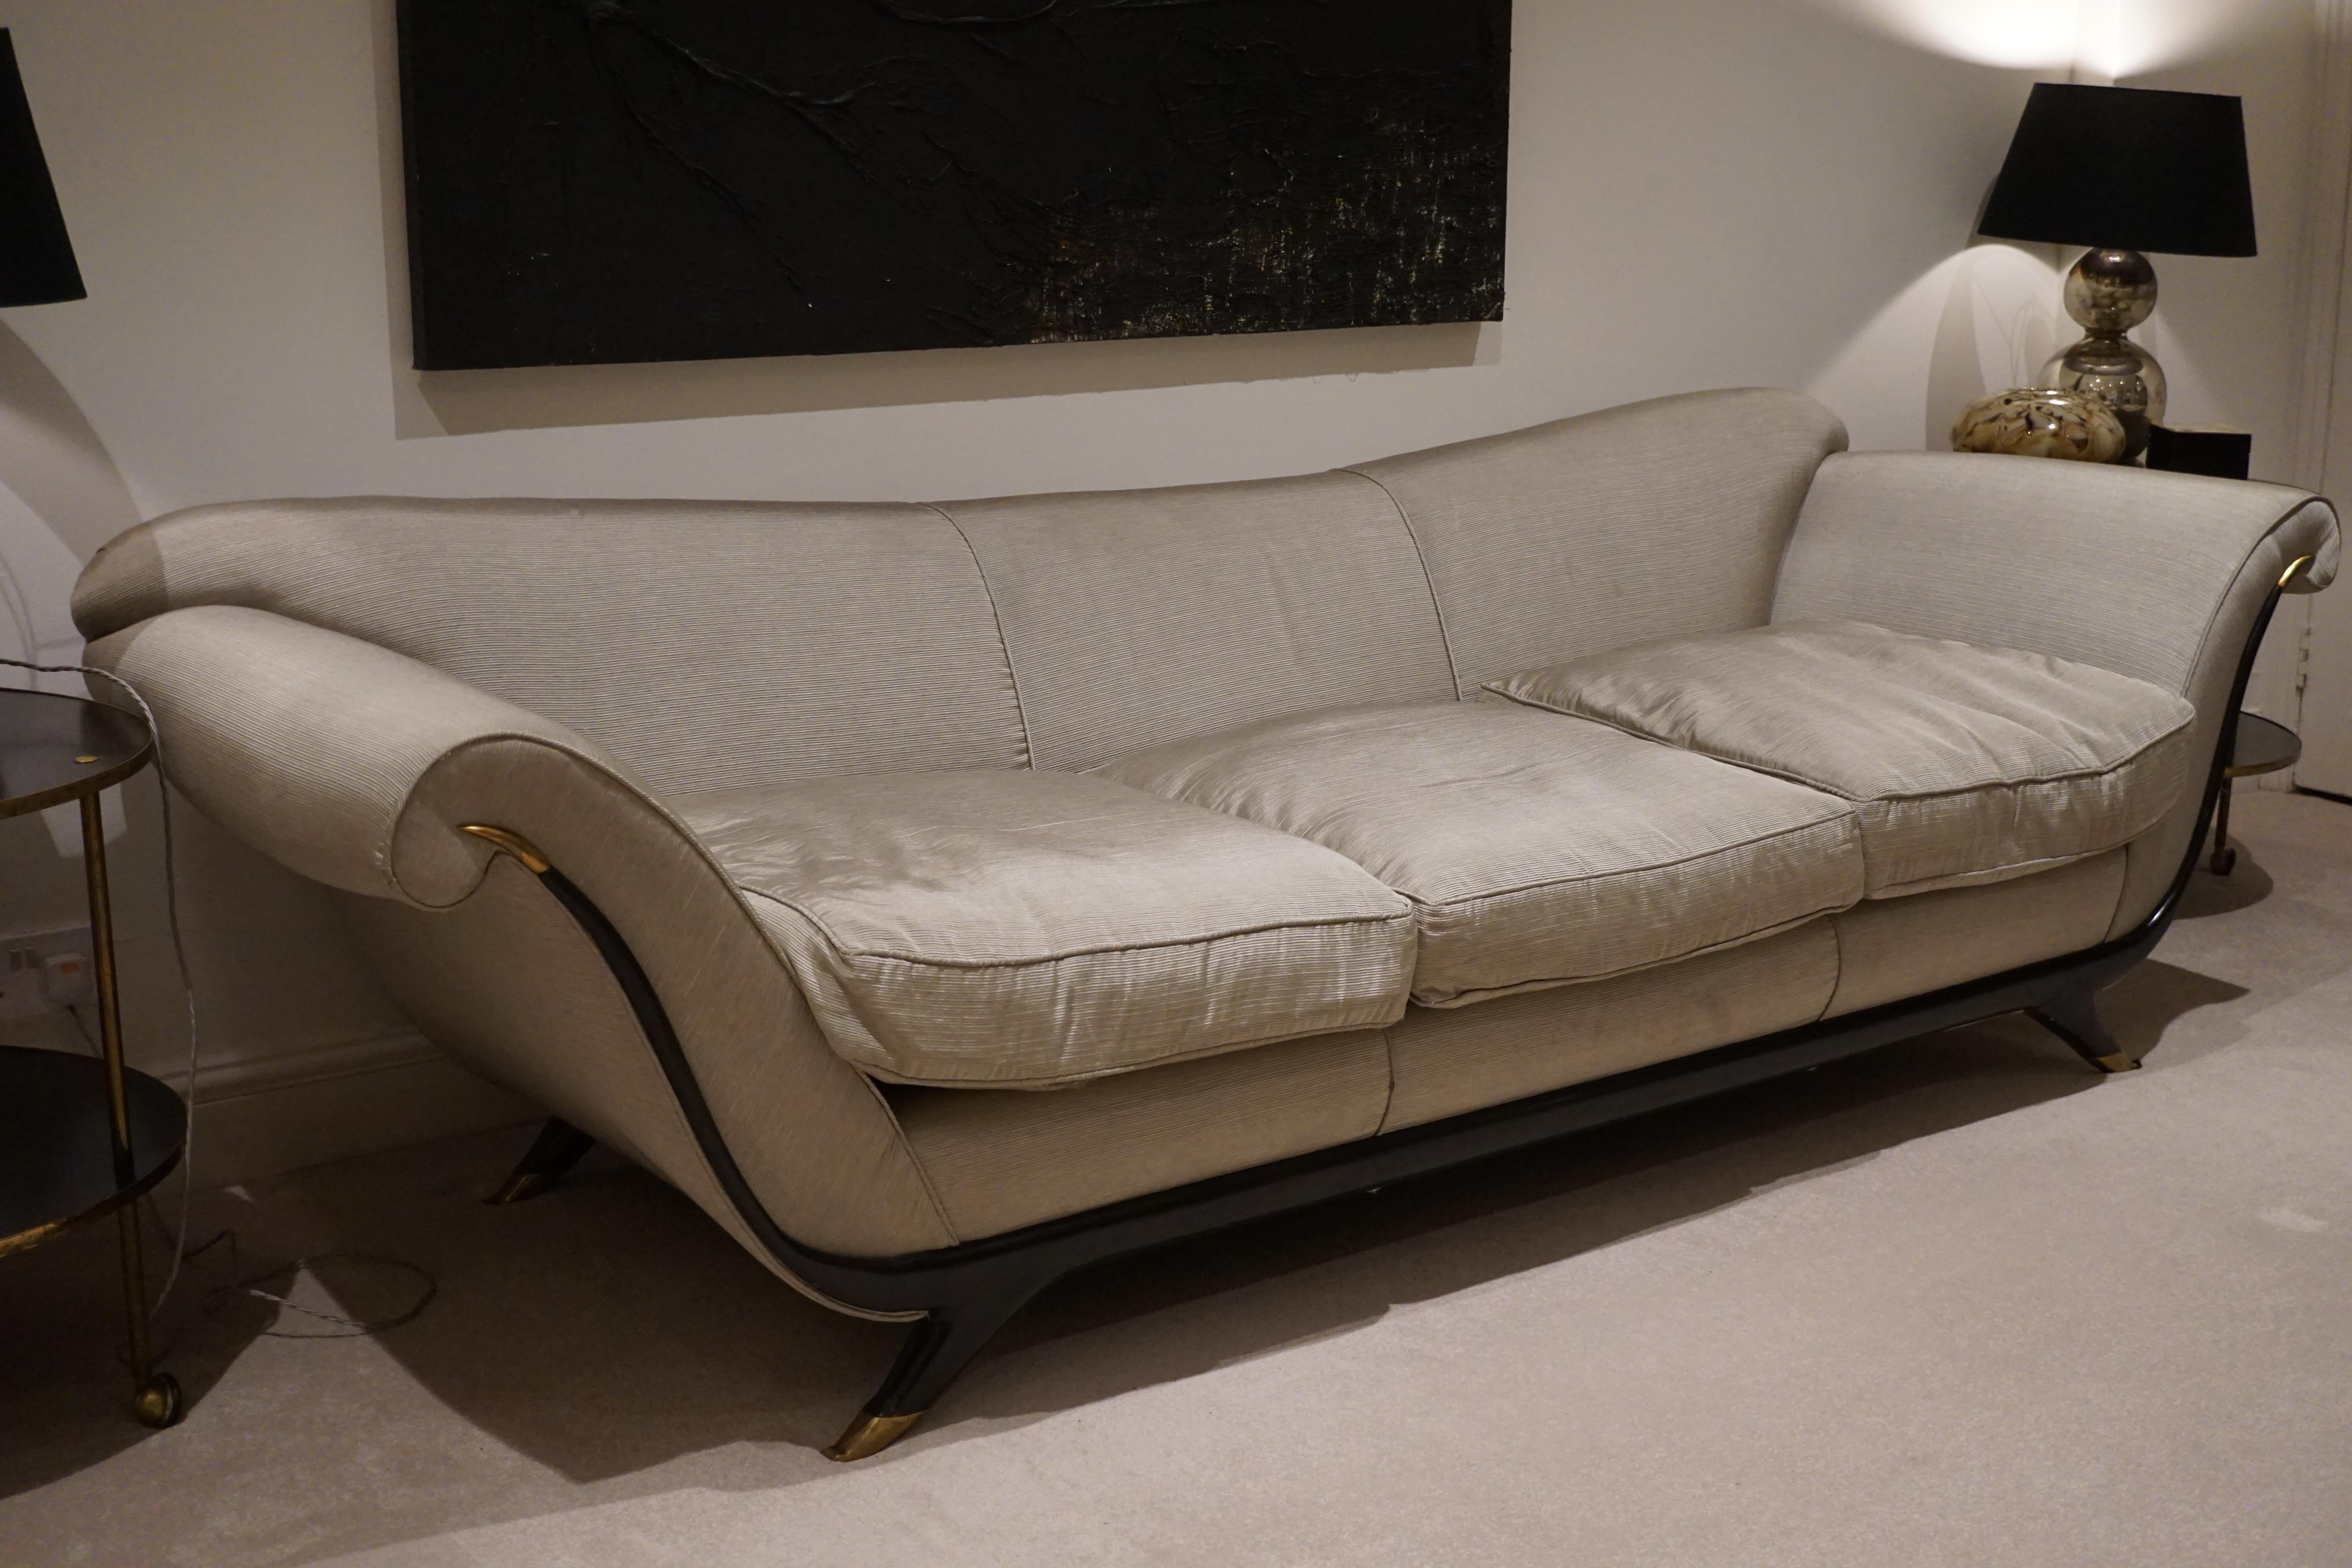 This is one of Ulrichs most outstanding sofa designs.
This particular sofa was part of Joseph Ettedgui’s personal collection of mid twentieth century furniture which was shown at the 2007 antiques fair in London  and then purchased by a client of